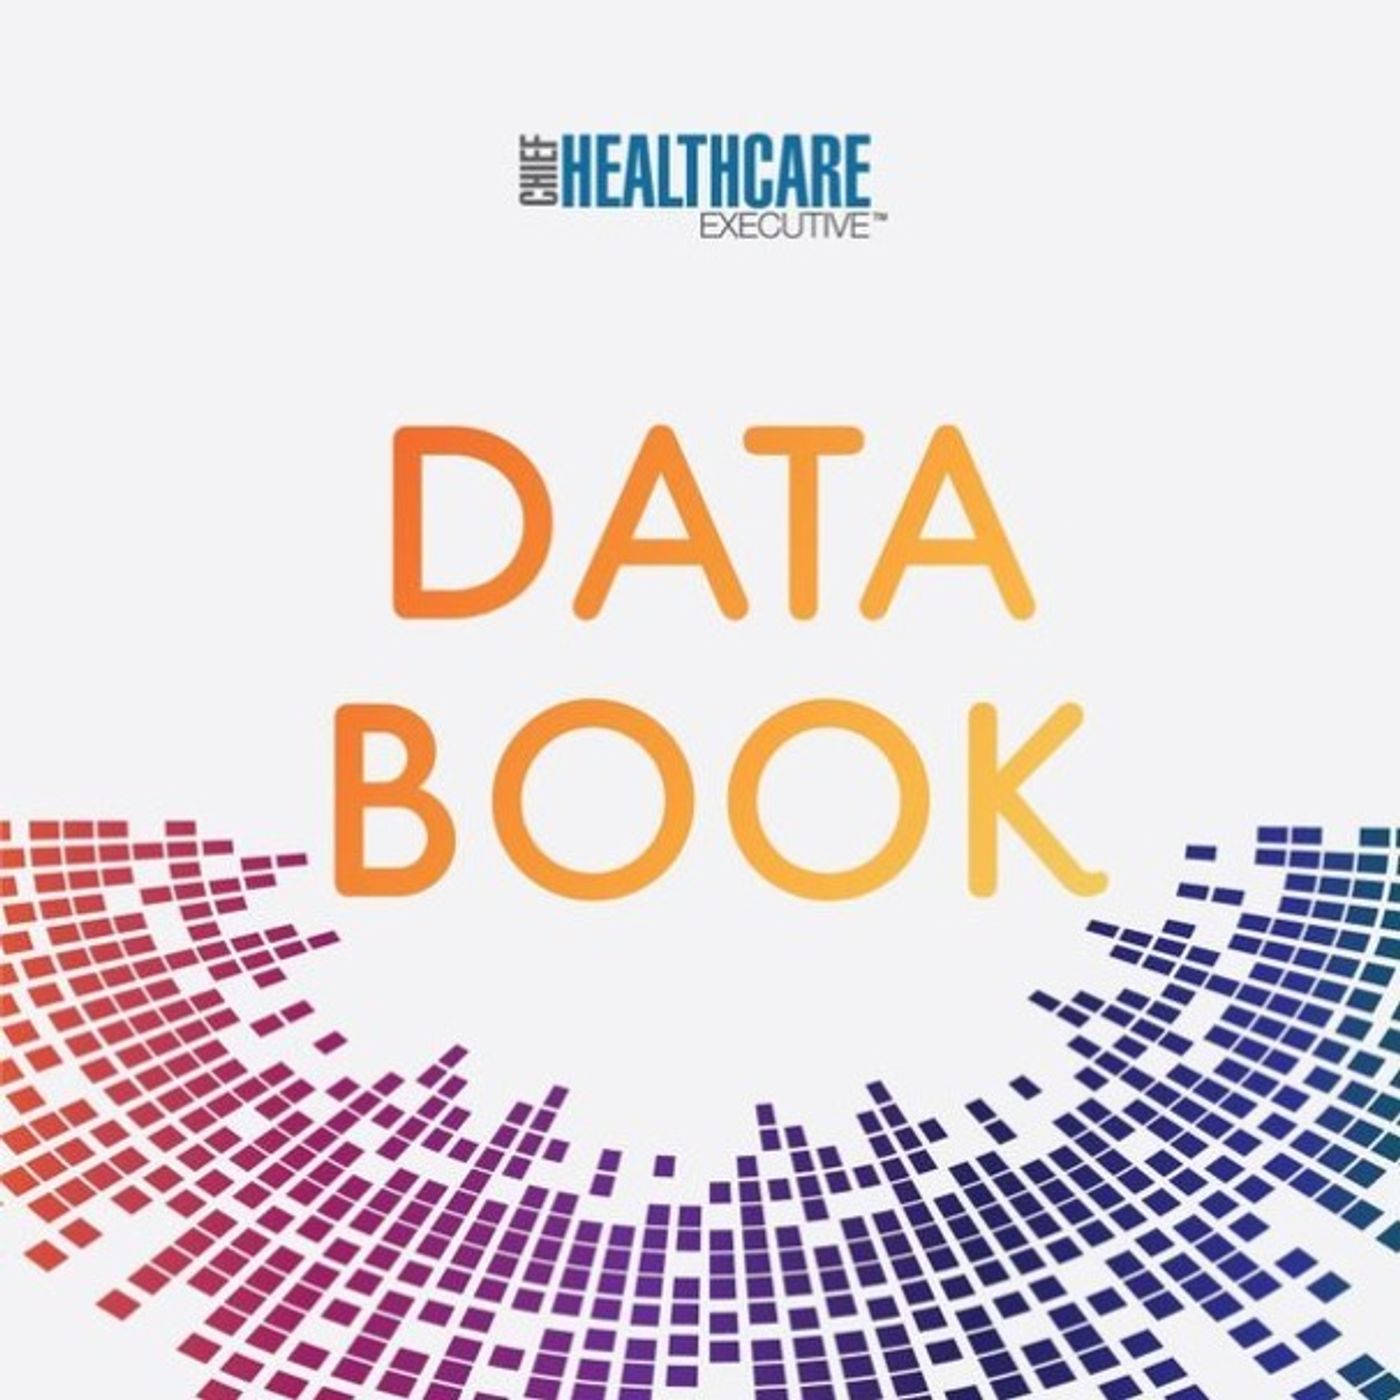 S8 Ep2: Data Book: Looking at interoperability and exchanging health data more easily